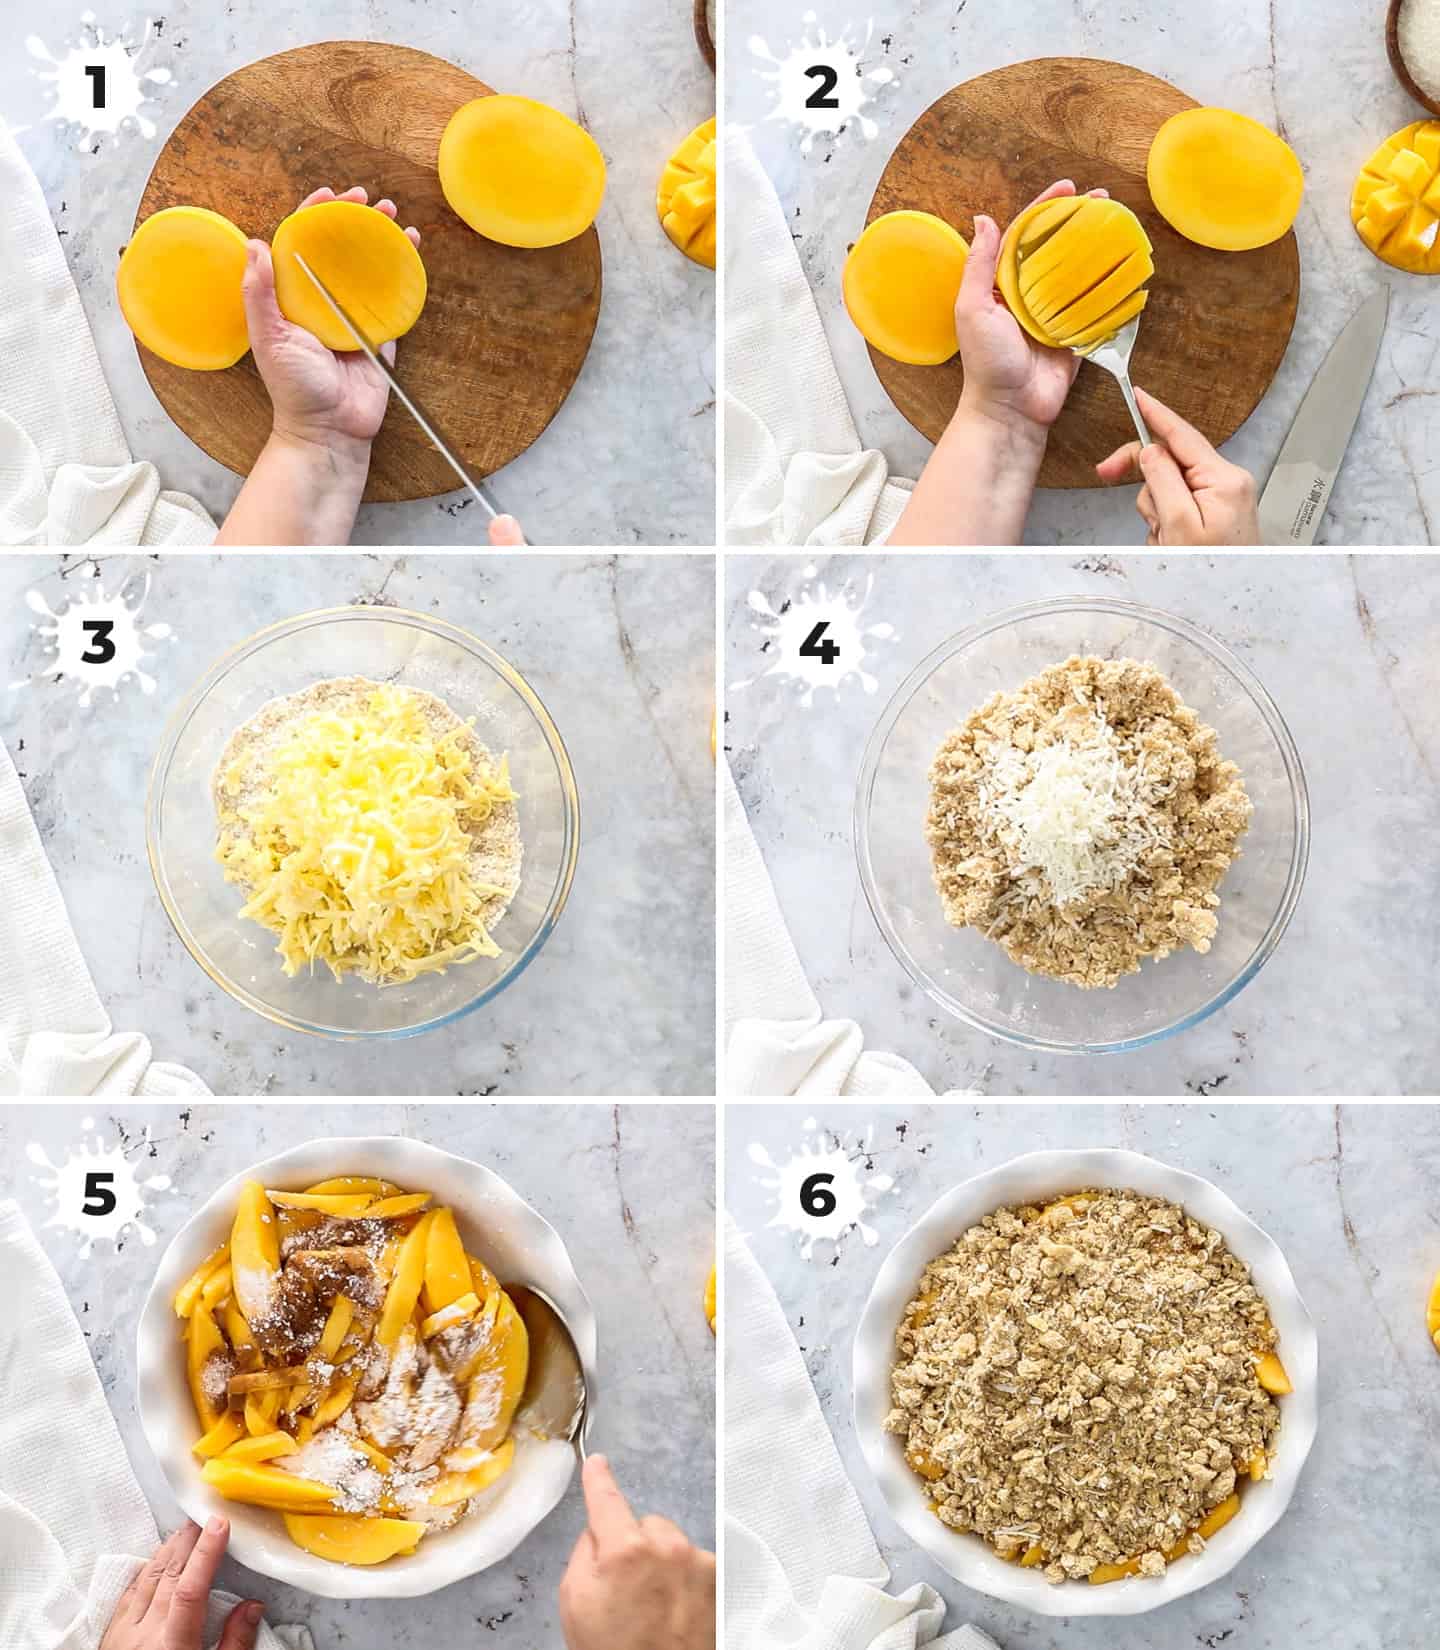 A collage of 6 images showing how to make mango crumble.